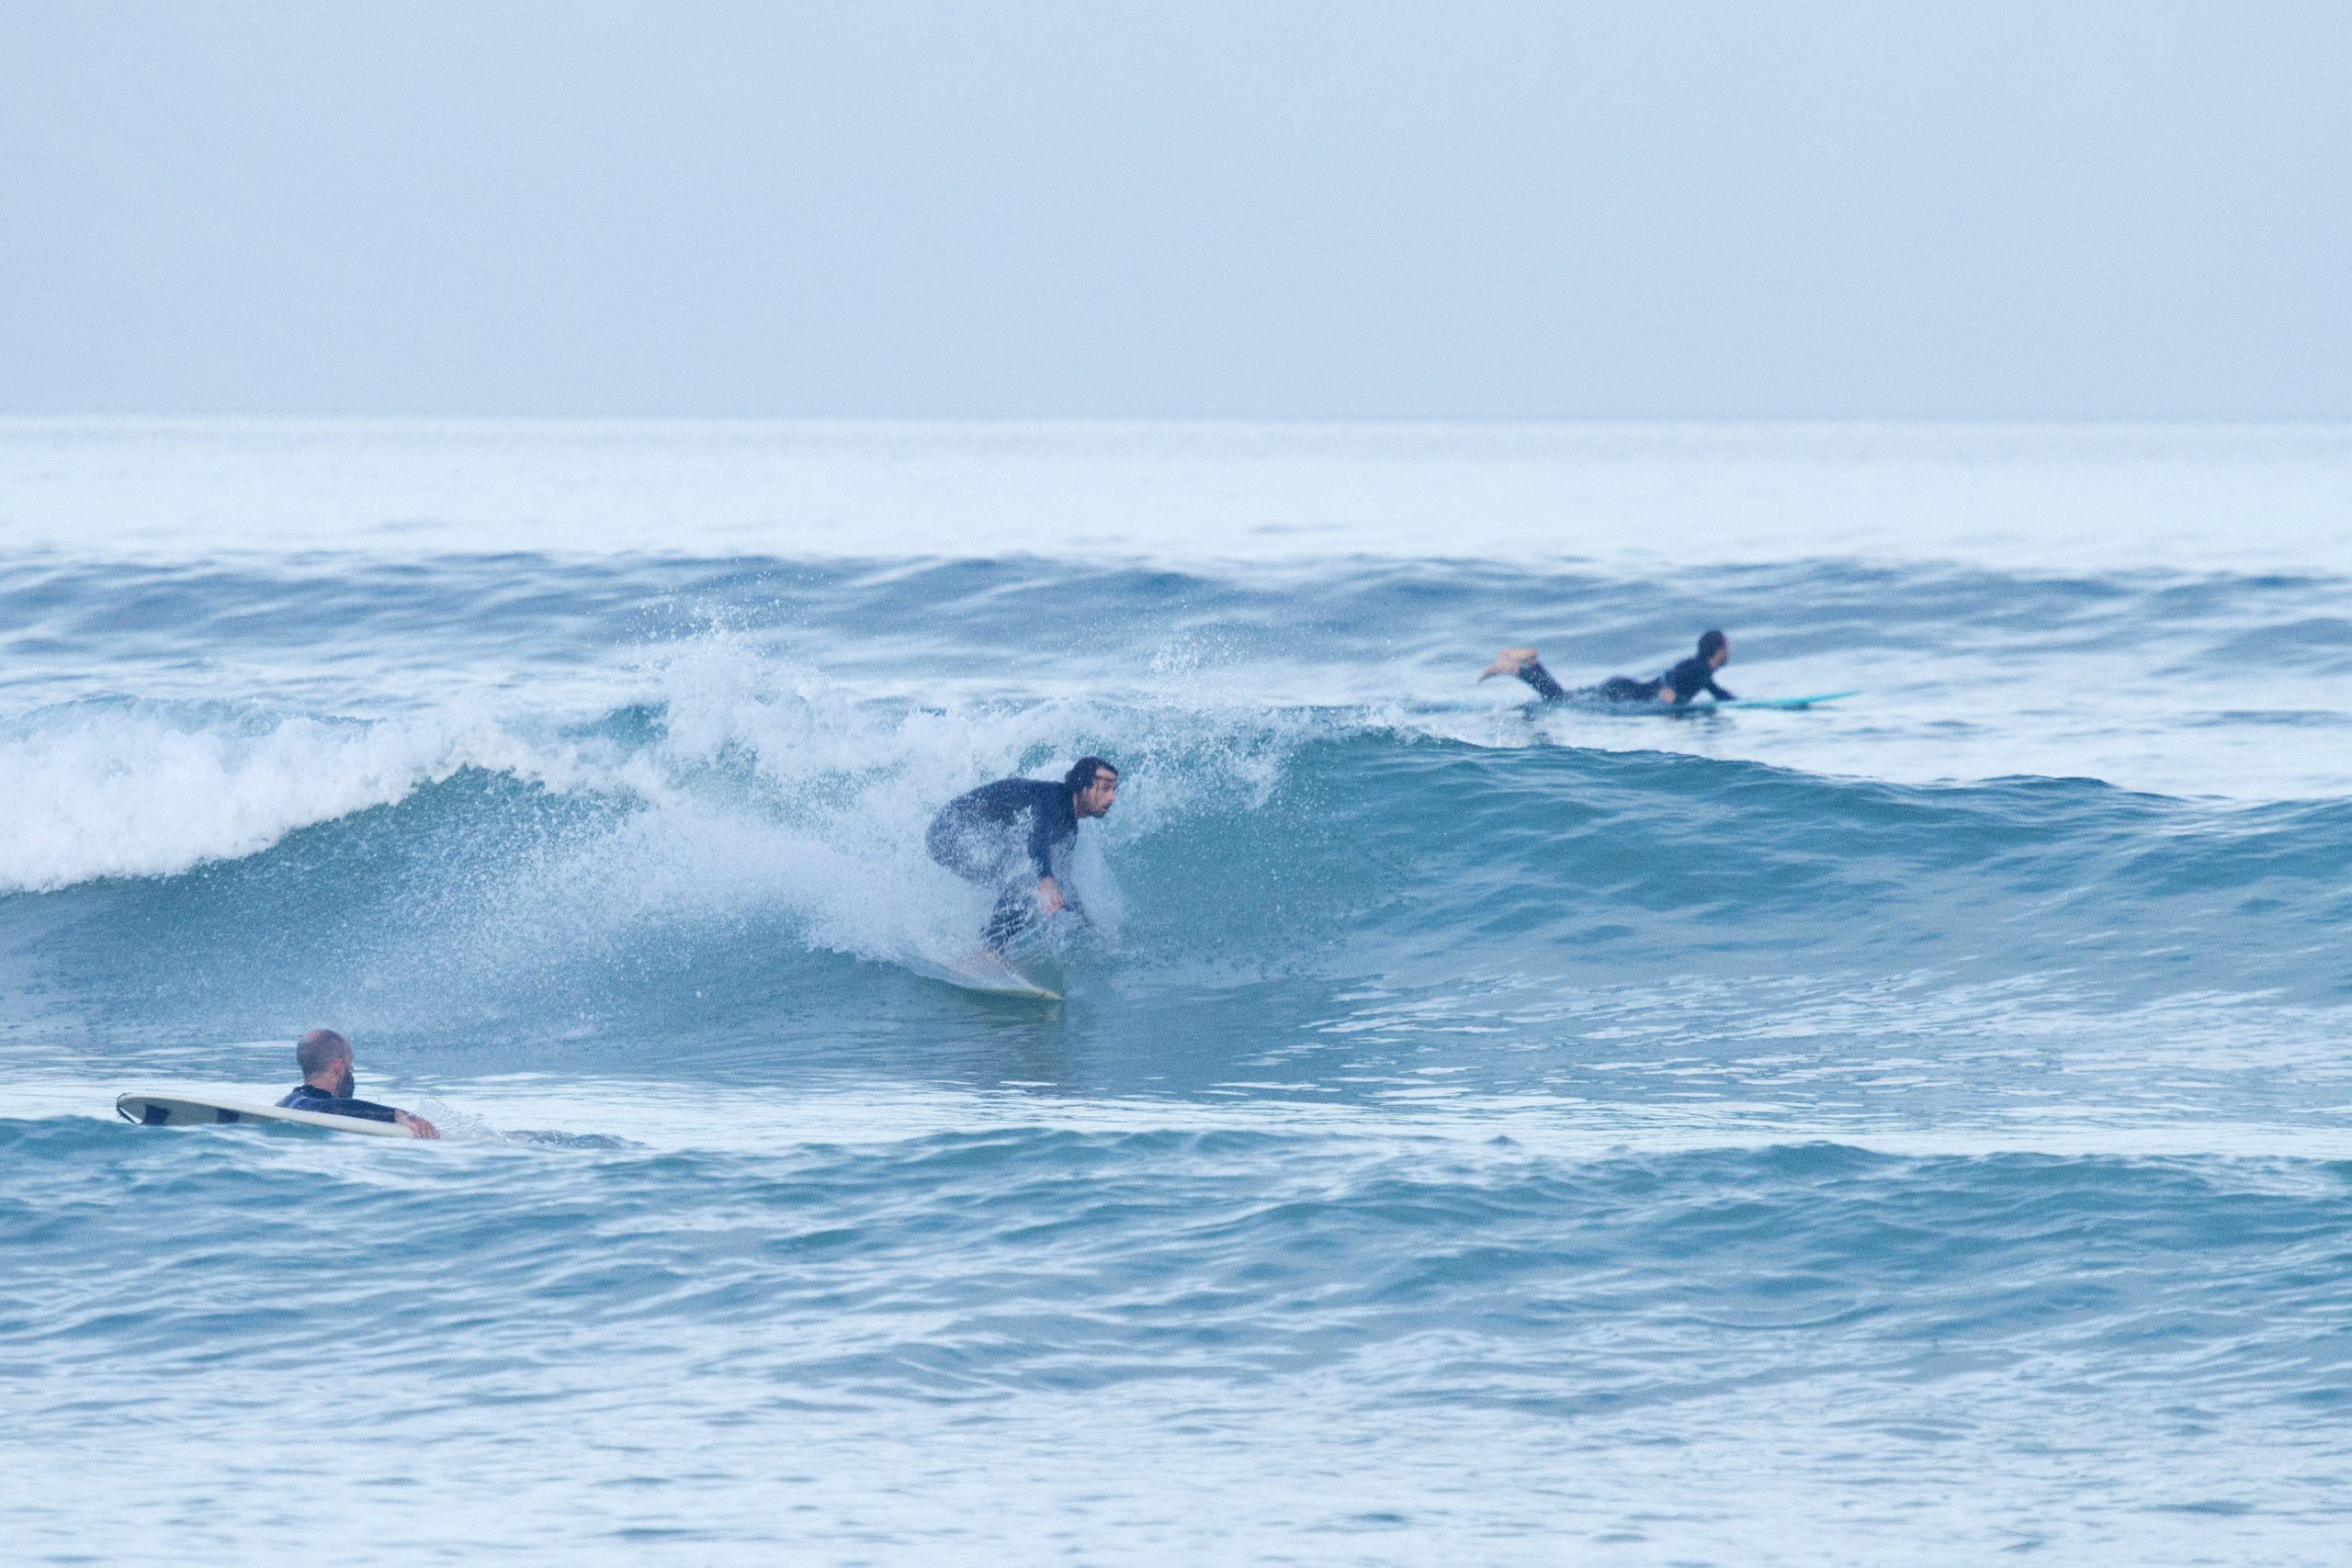 Surfers riding waves off the coast of one of Cape Town's many beaches